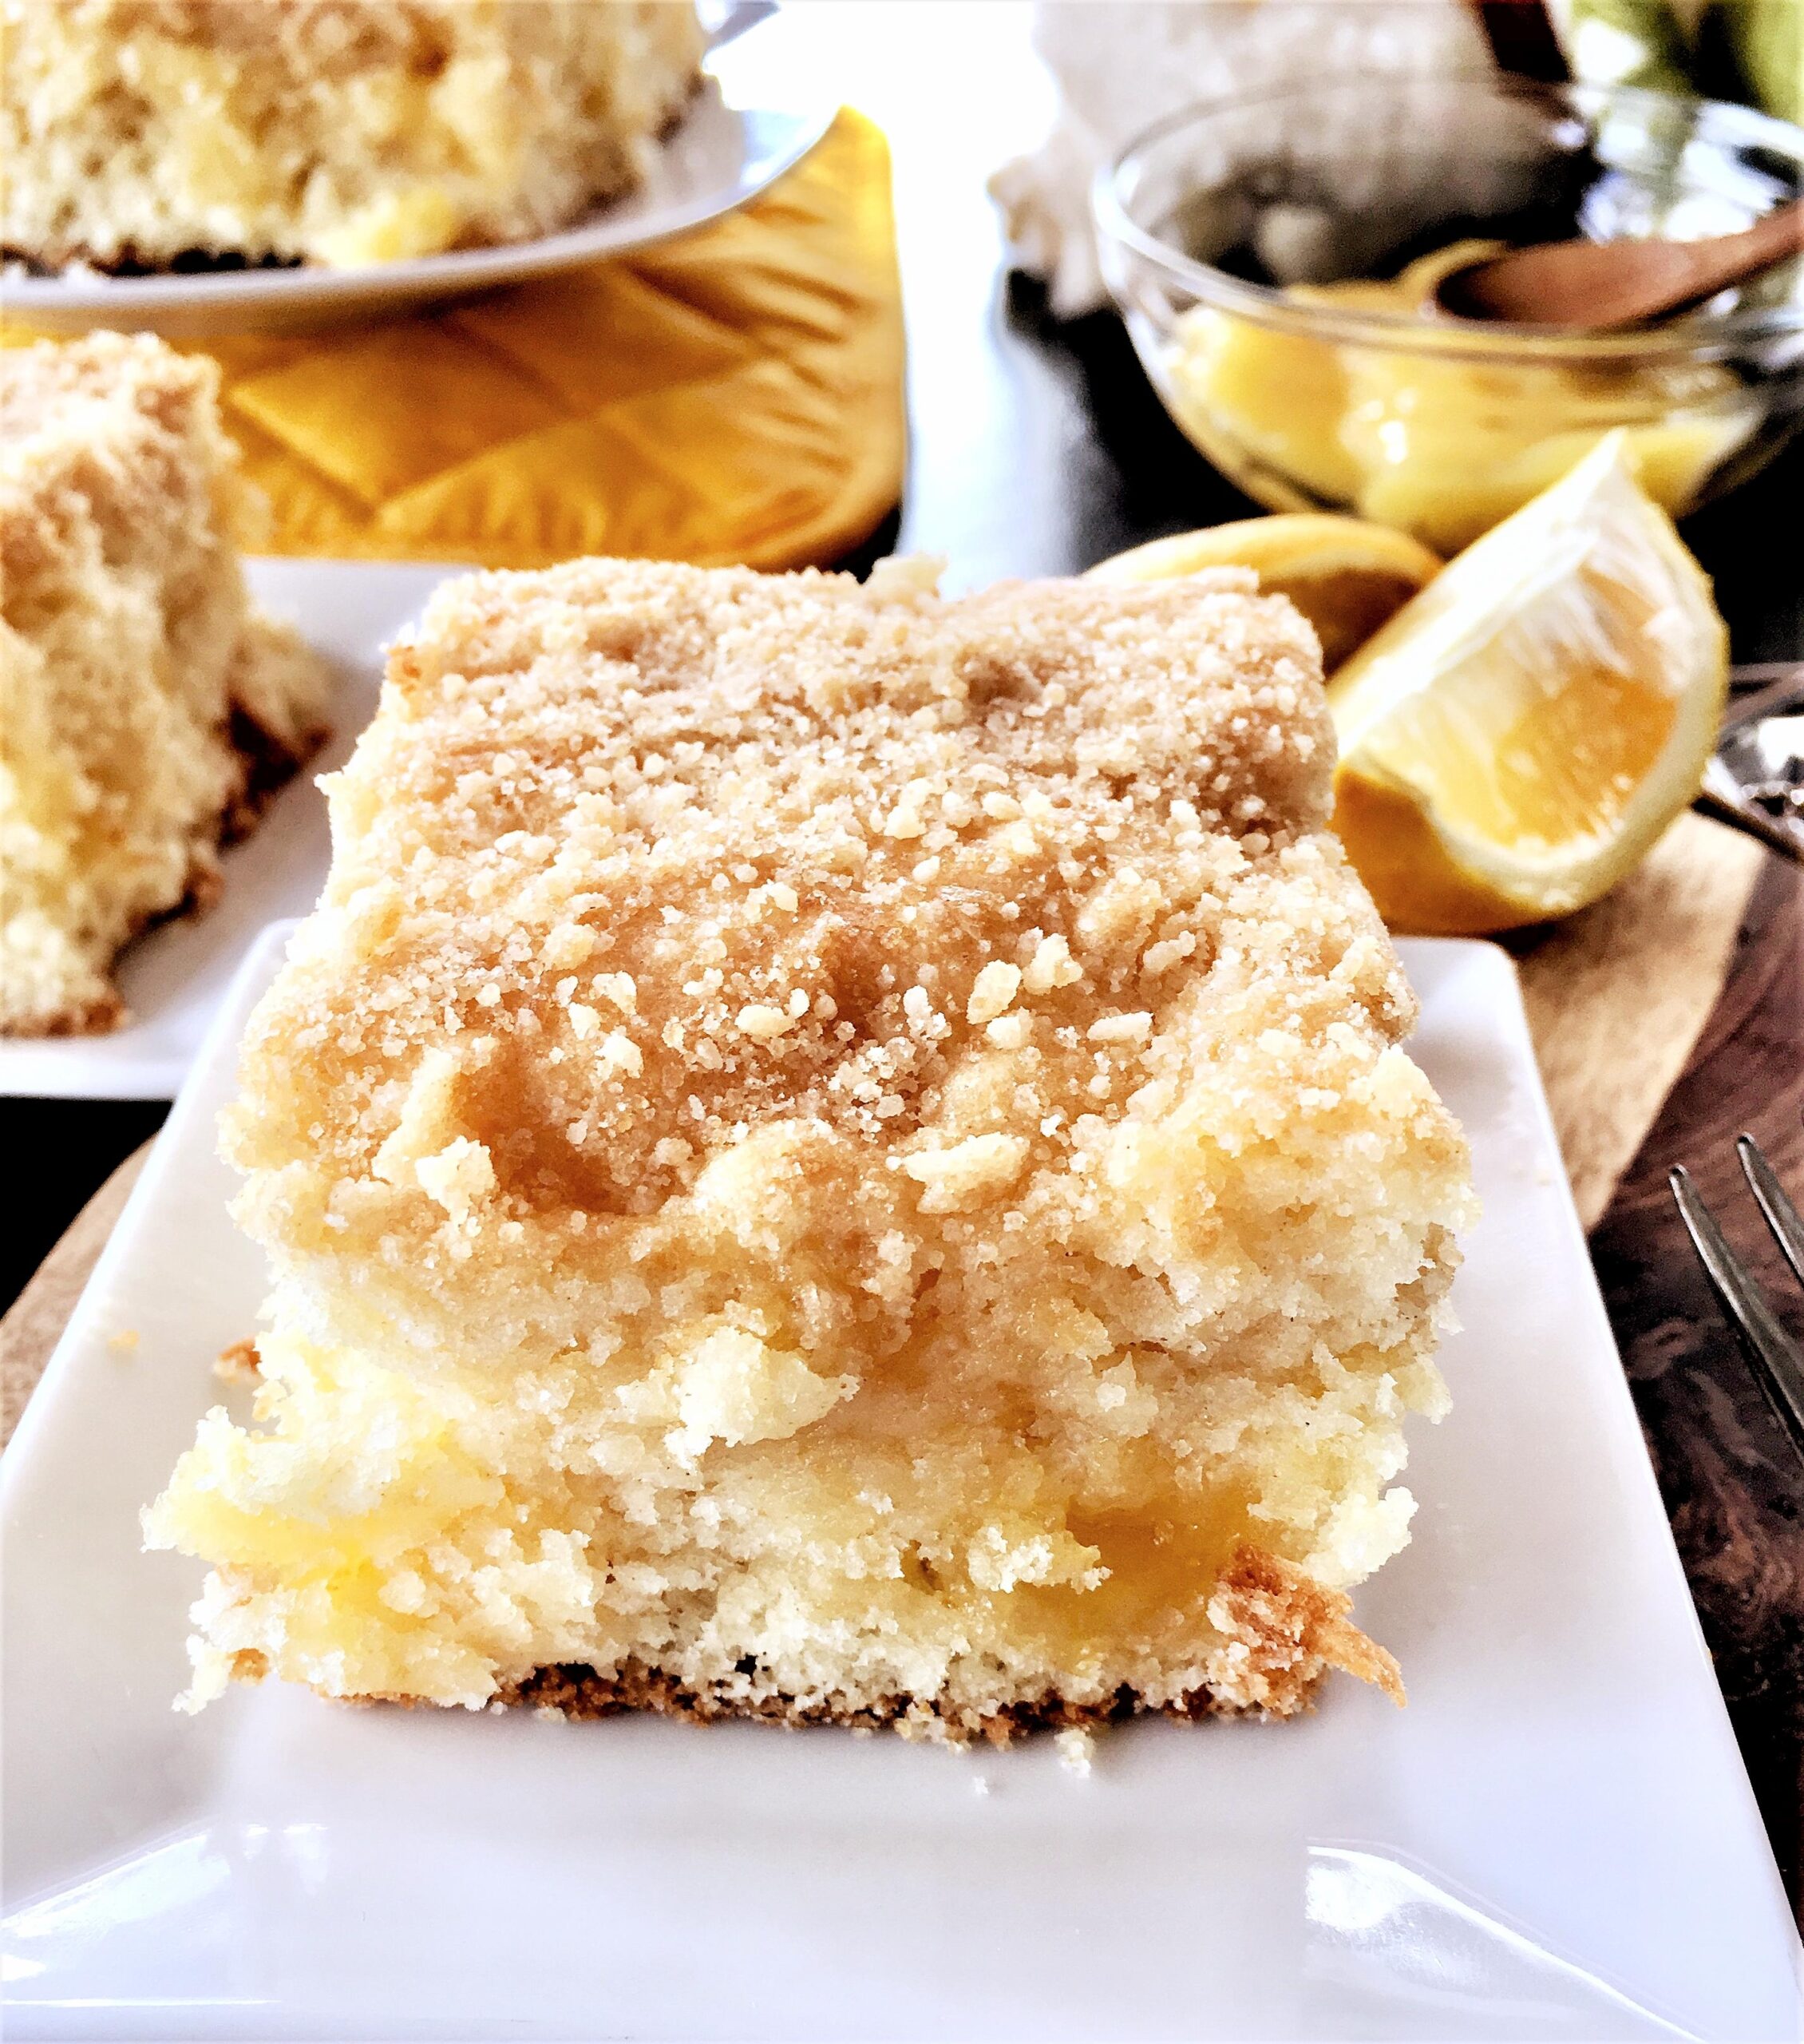  The vibrant yellow zest of Meyer lemons adds a refreshing twist to this classic coffee cake recipe.